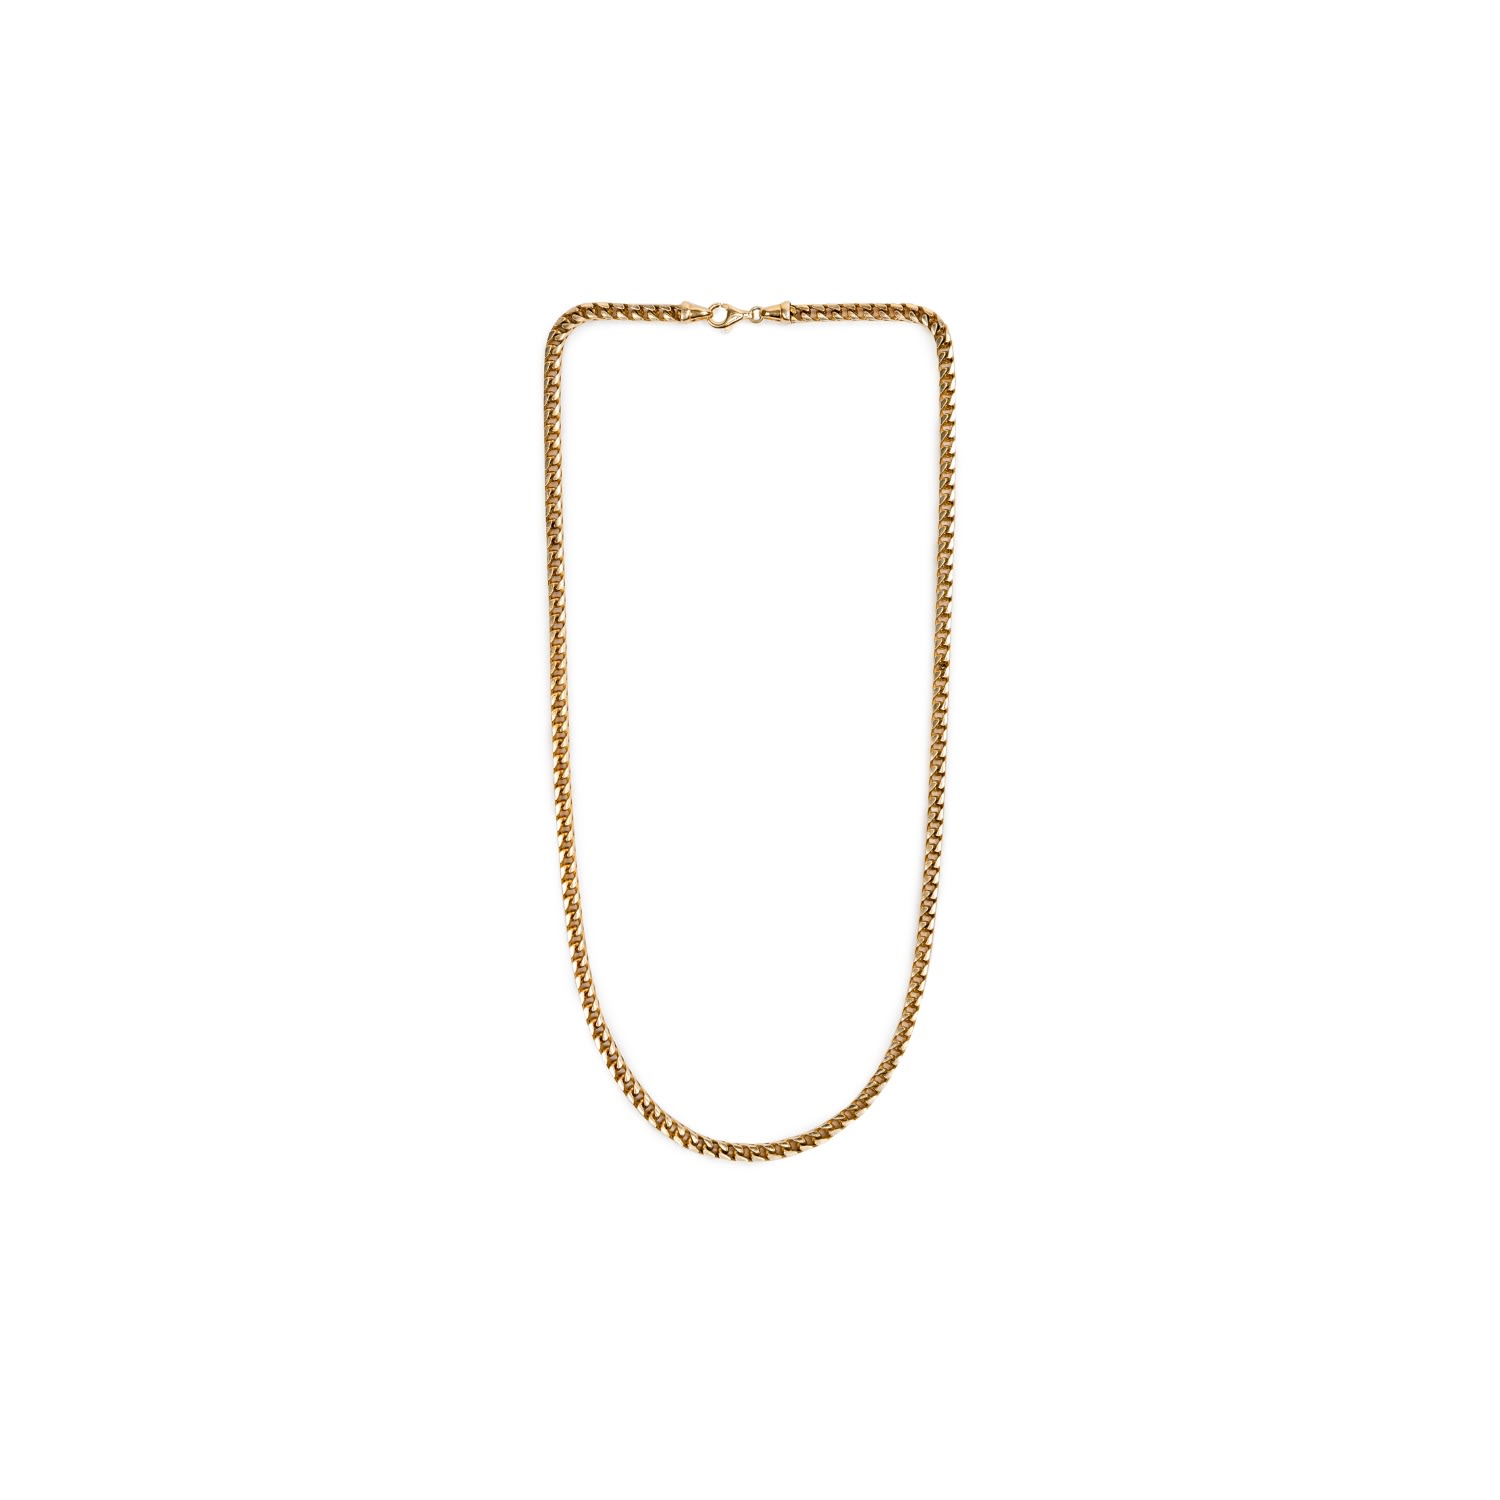 Men's 4.5Mm Bold Franco Chain Necklace - Gold Undefined Jewelry